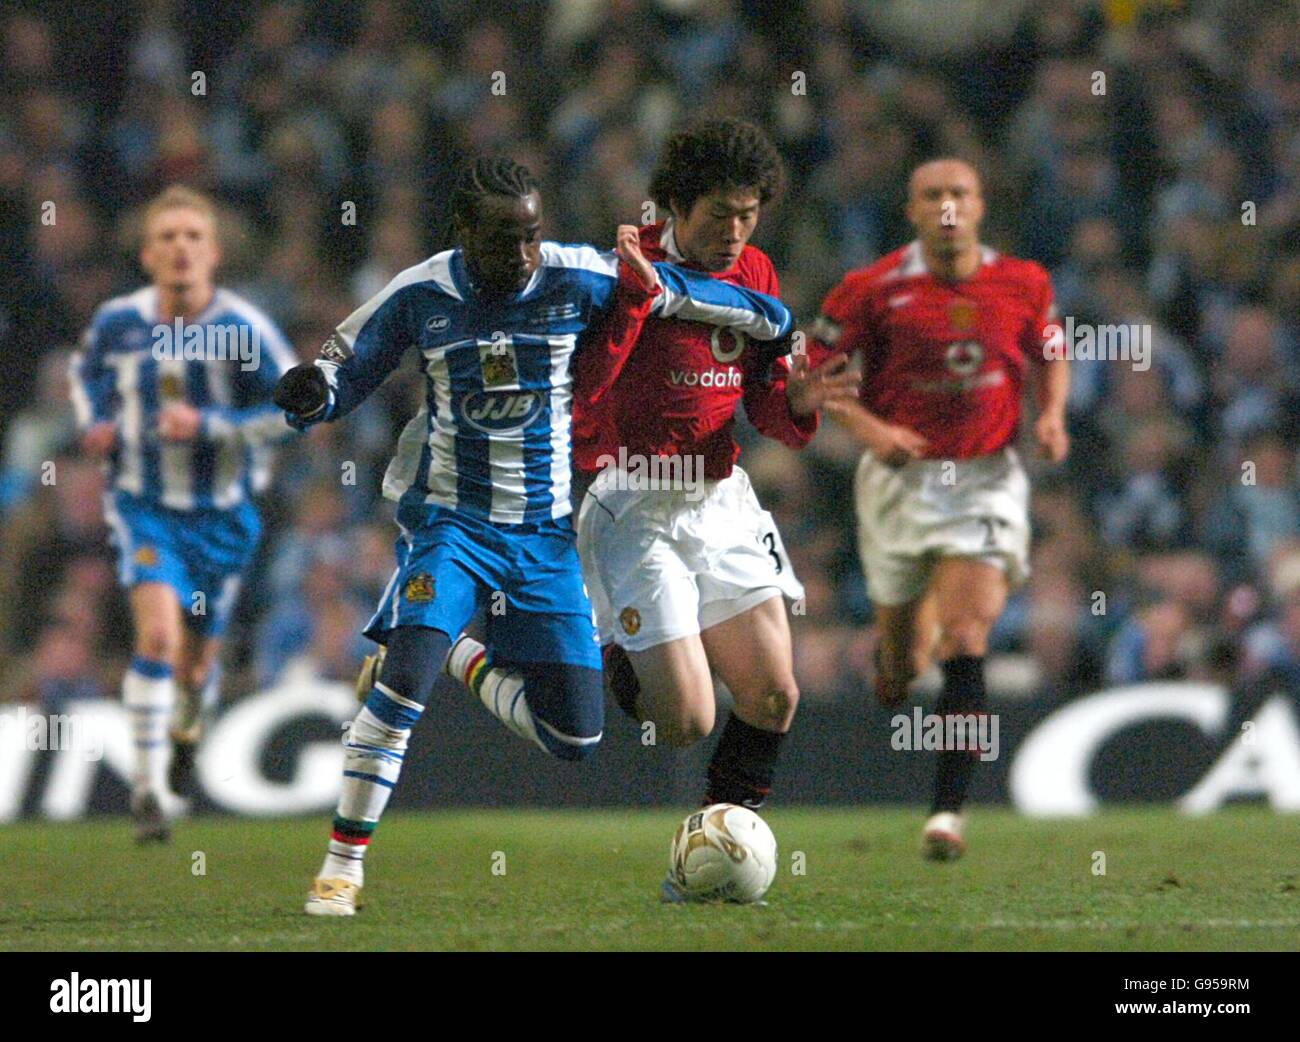 (L-R) Wigan Athletiic's Pascal Chimbonda and Manchester United's Ji-Sung Park battle for the ball Stock Photo